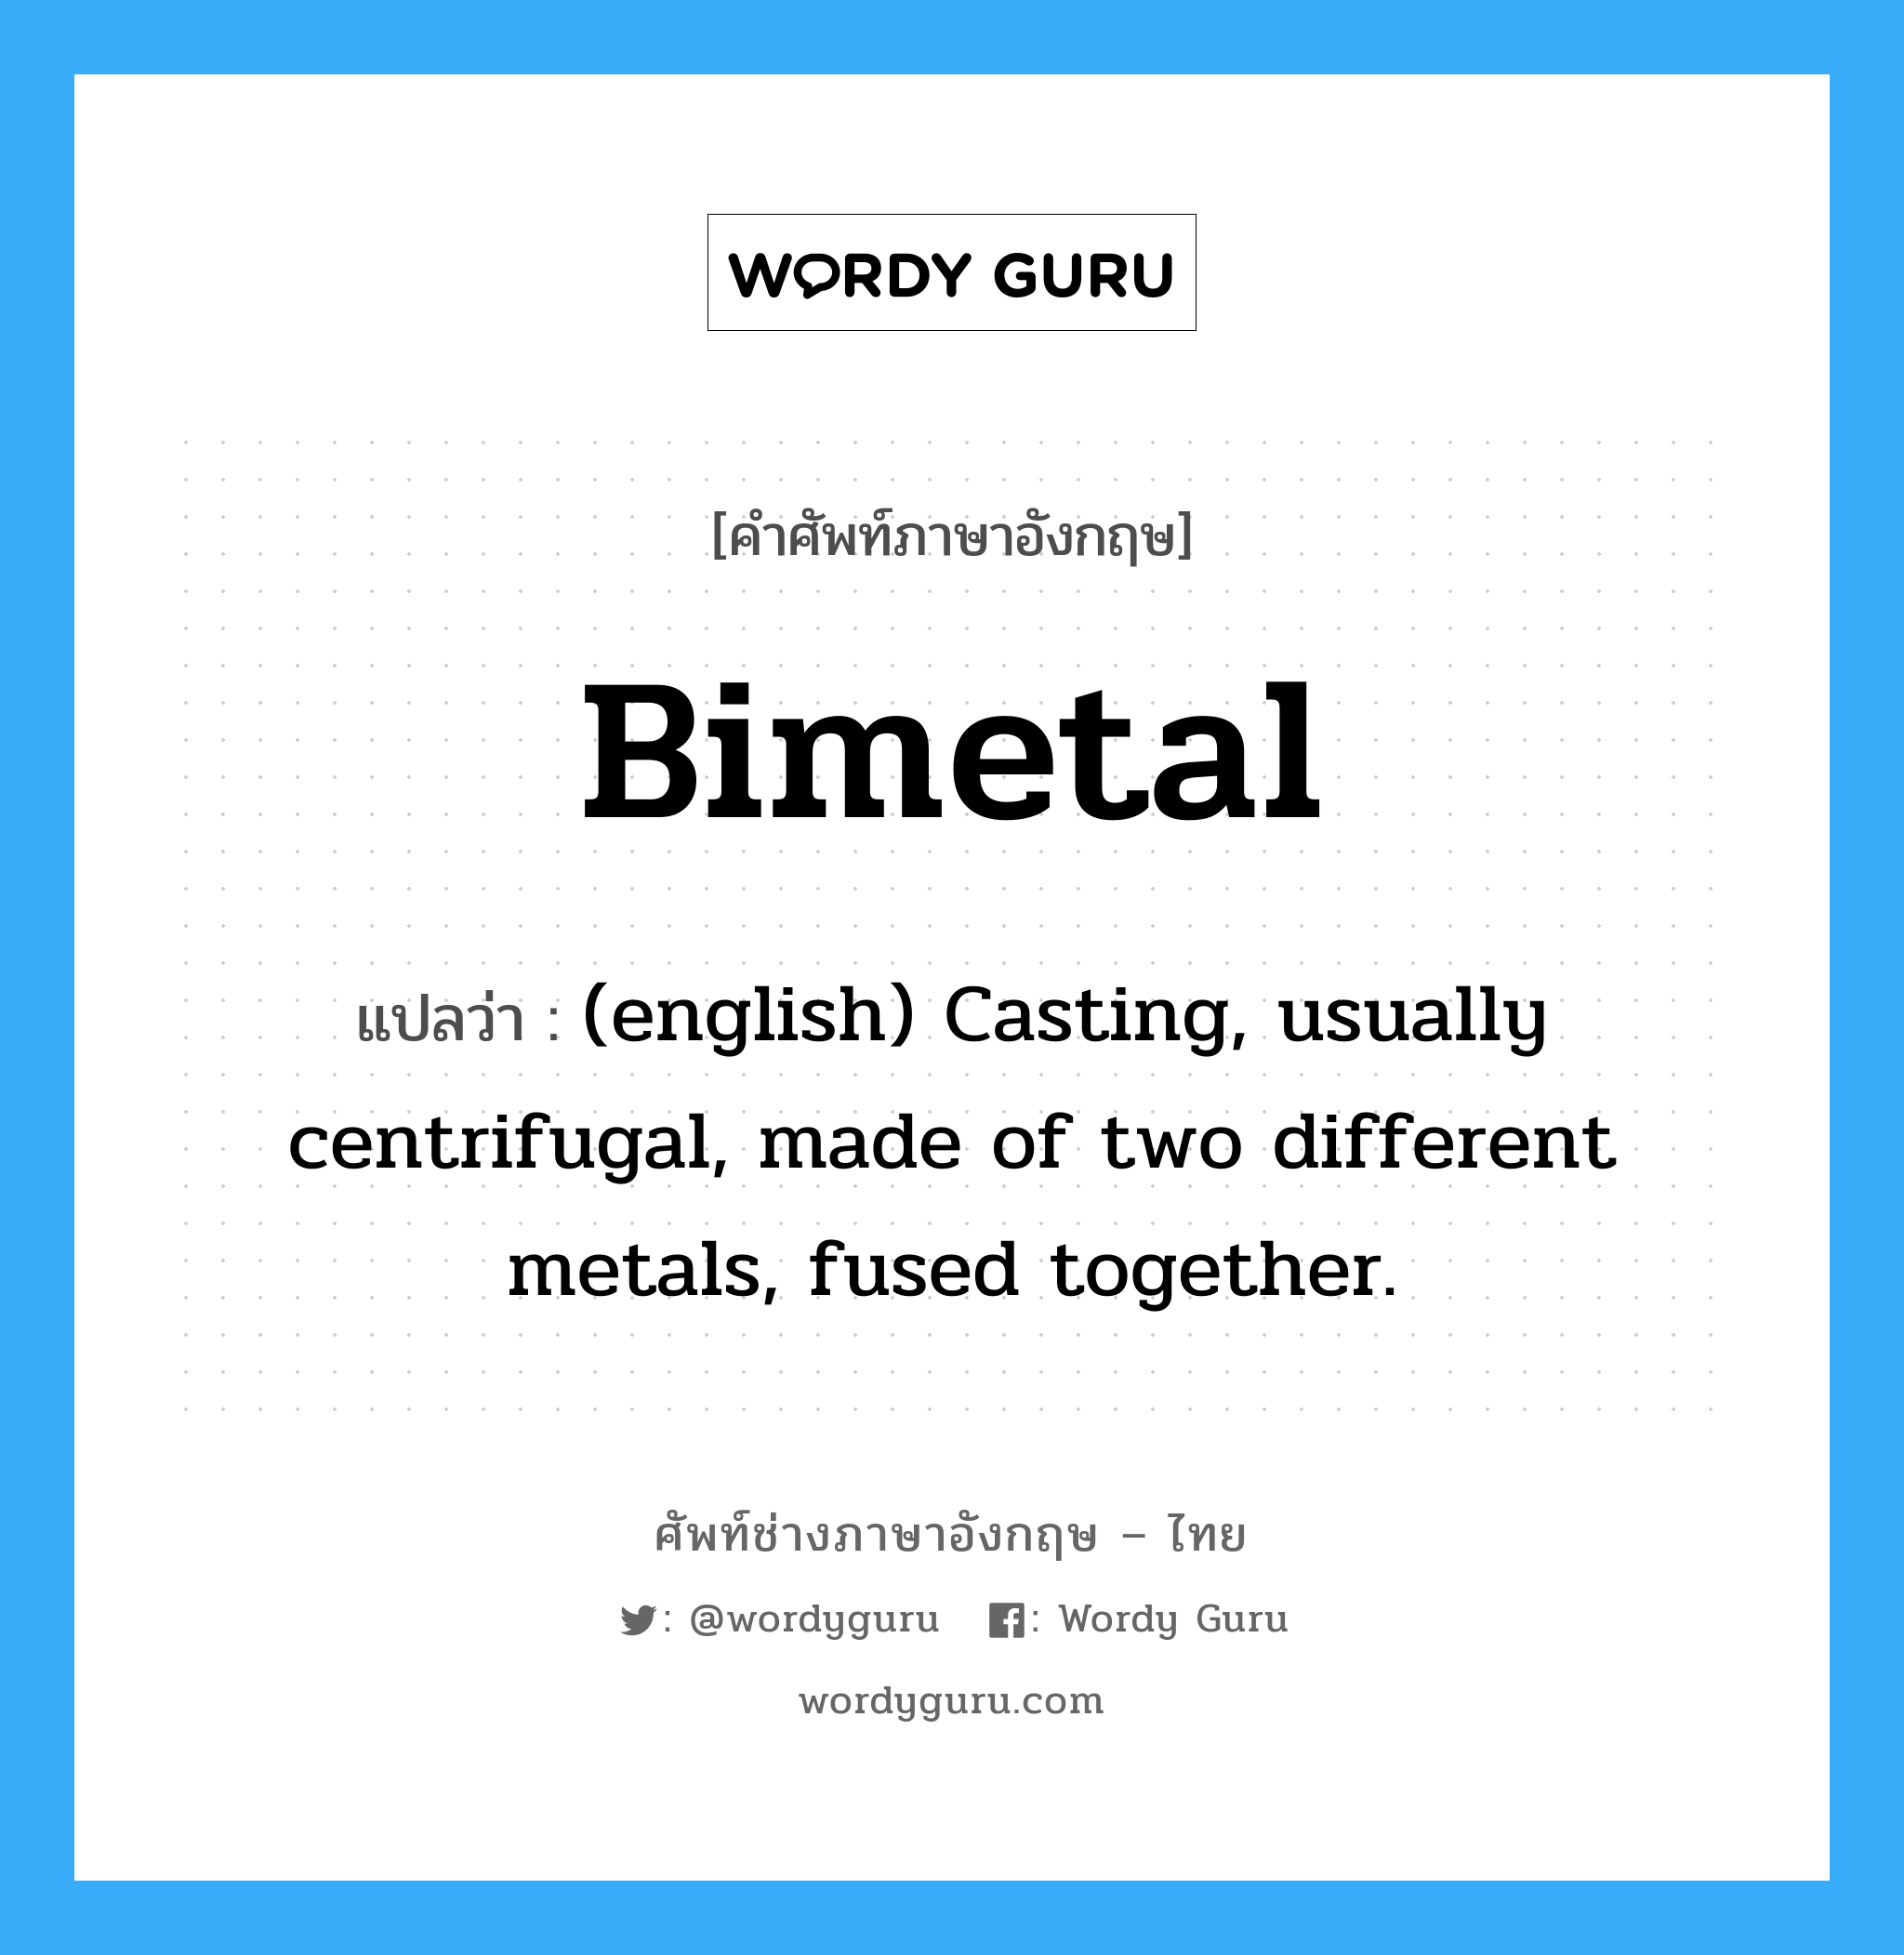 Bimetal แปลว่า?, คำศัพท์ช่างภาษาอังกฤษ - ไทย Bimetal คำศัพท์ภาษาอังกฤษ Bimetal แปลว่า (english) Casting, usually centrifugal, made of two different metals, fused together.